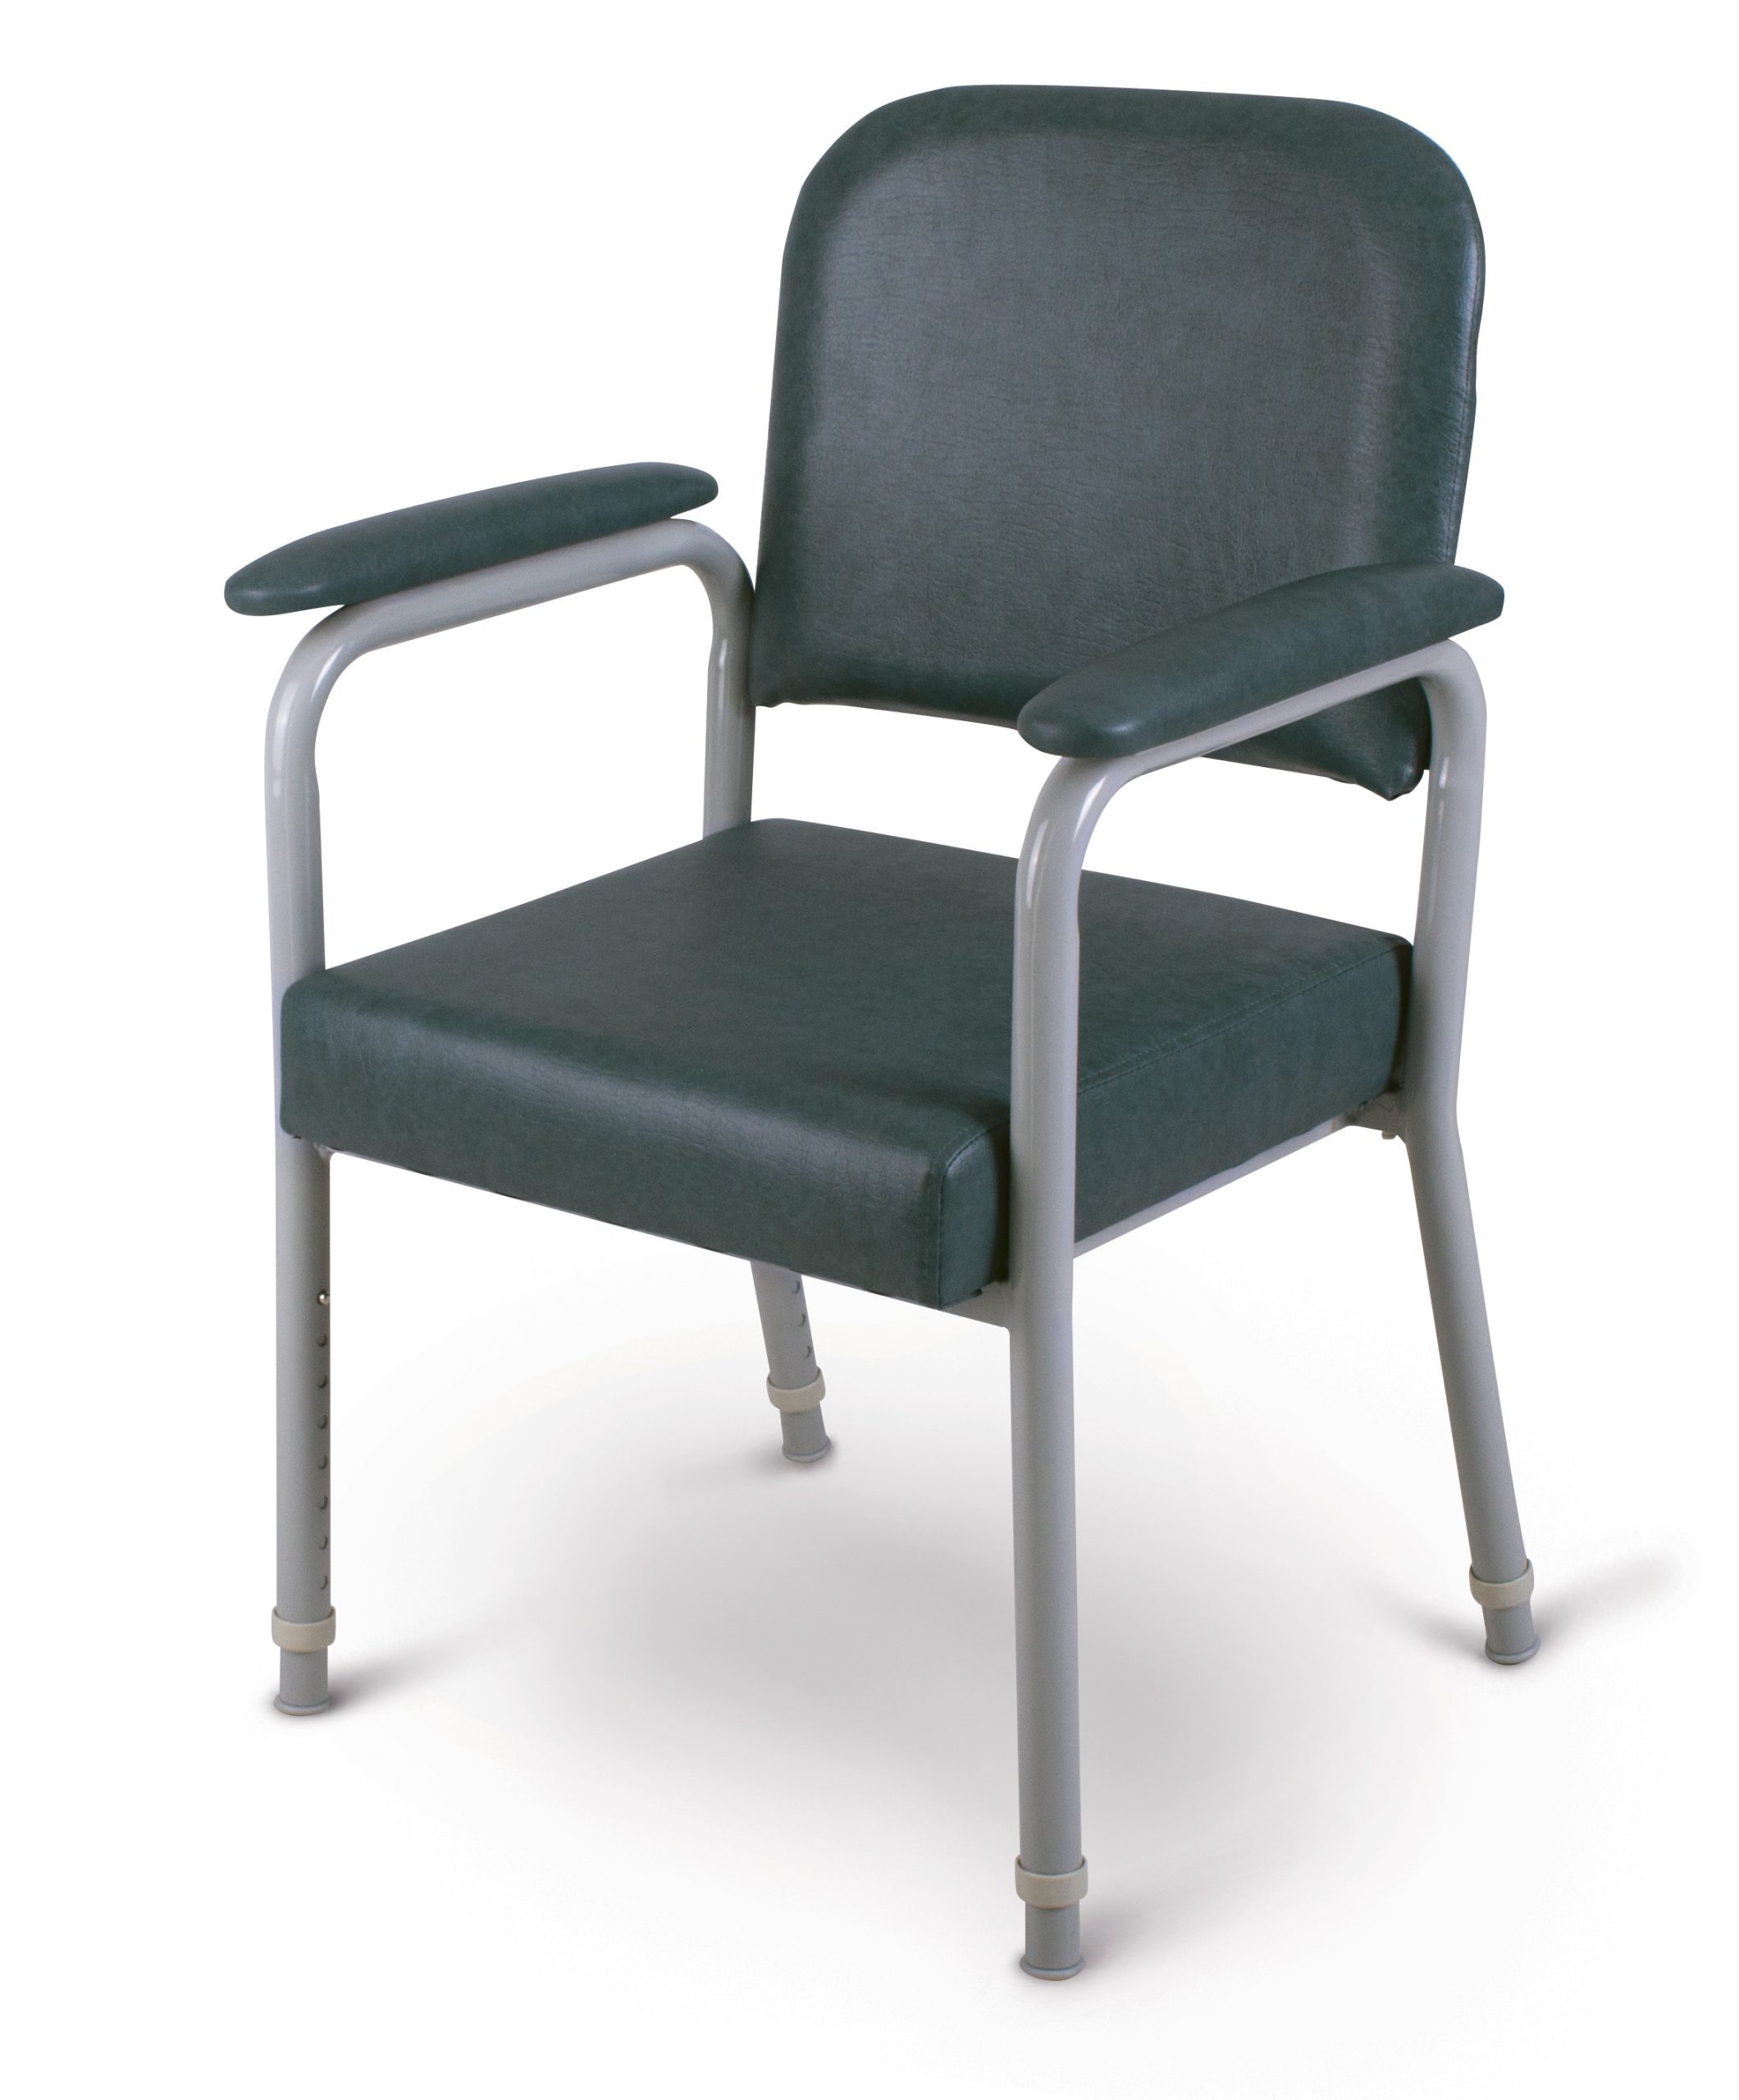 Rehab Chair (has legs that can be adjusted)